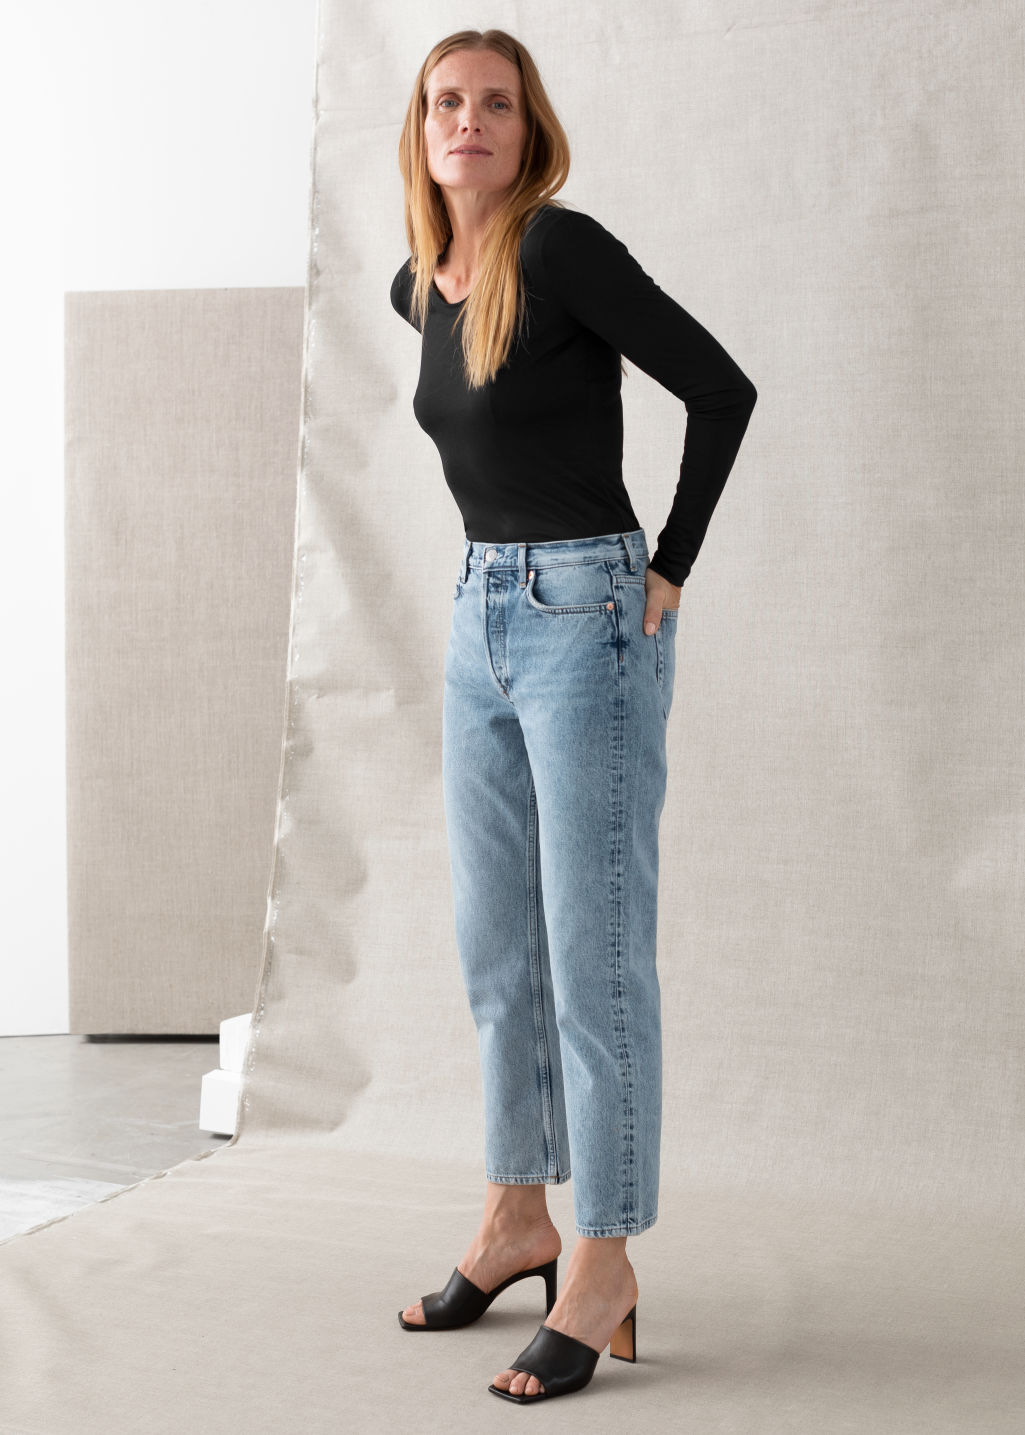 Keeper Cut Cropped Jeans - Light Blue - Straight - & Other Stories